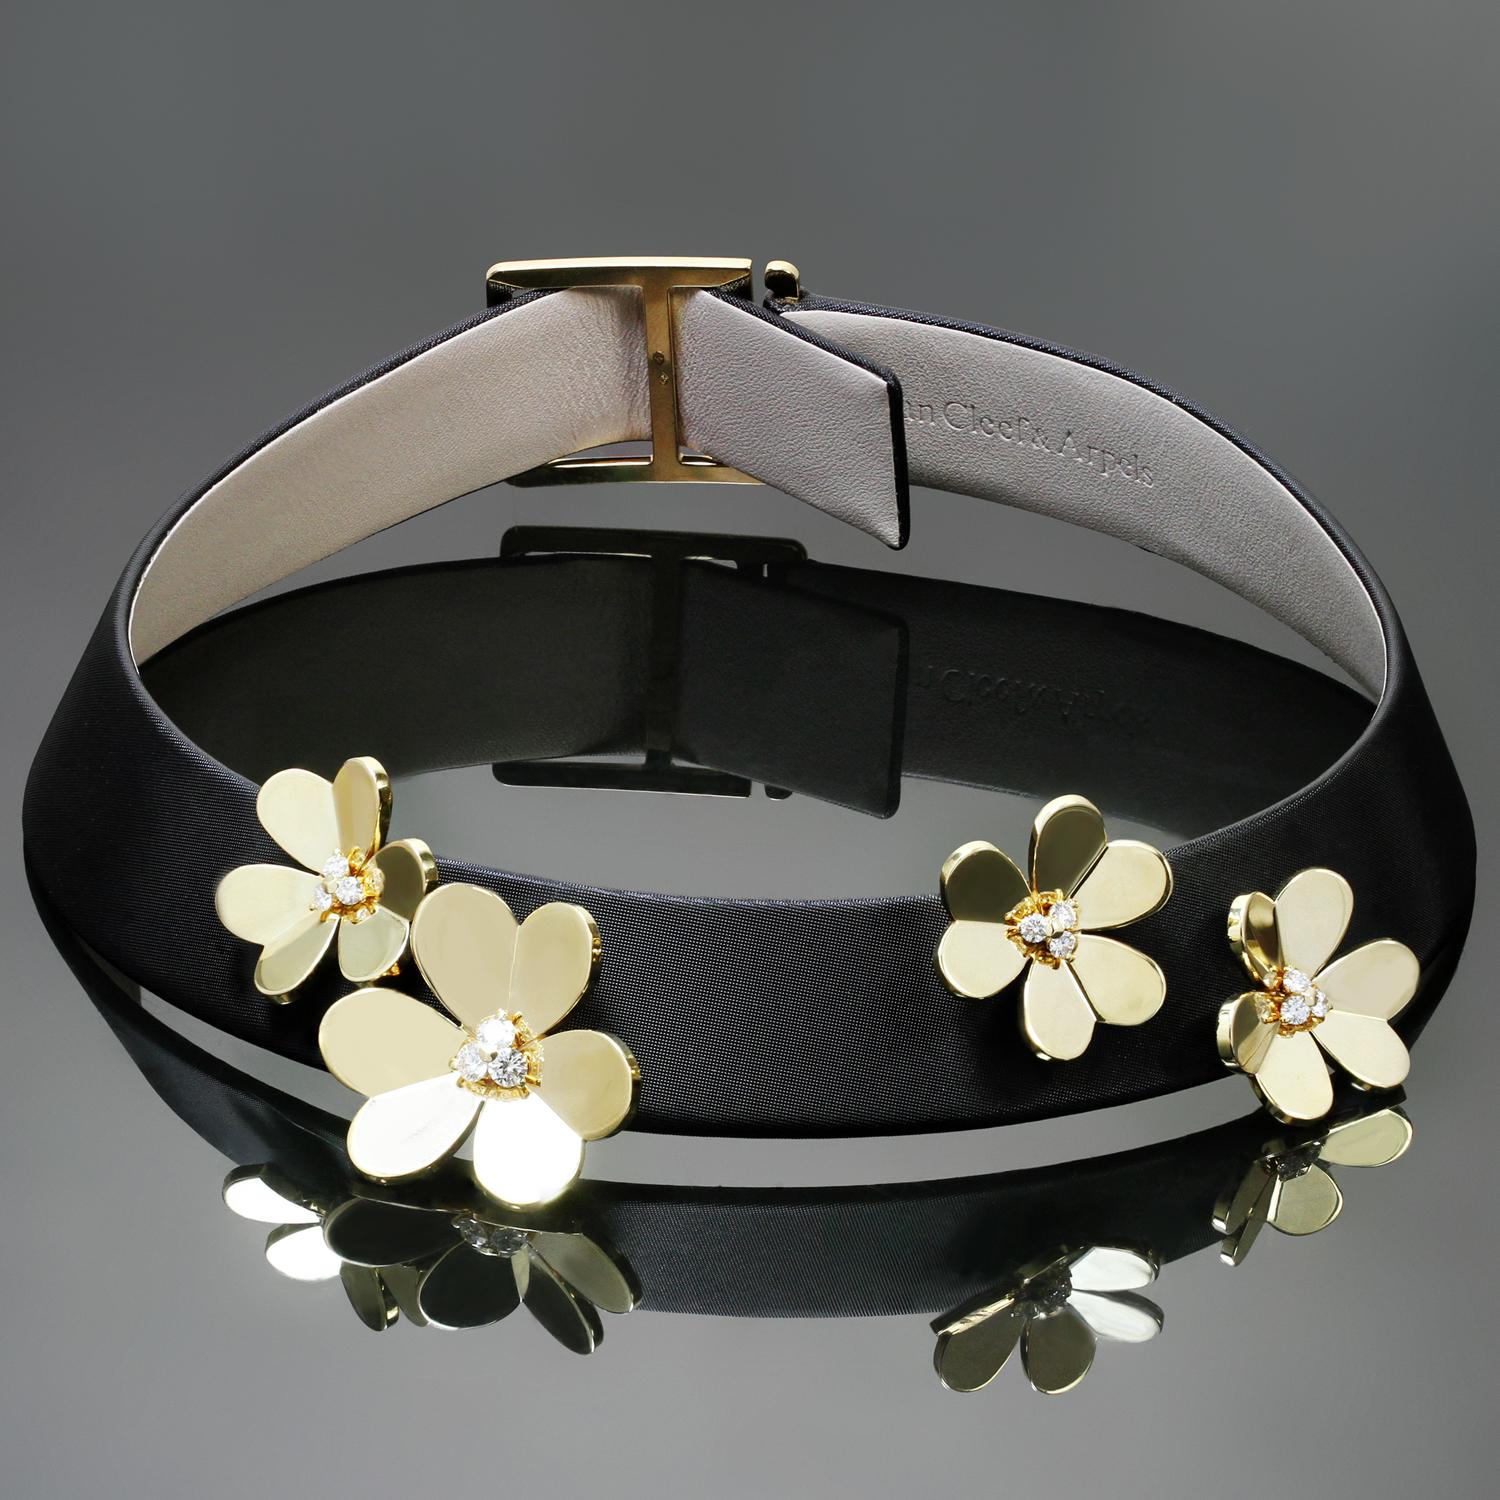 This rare and fabulous choker necklace from the famous Frivole collection by Van Cleef and Arpels features an adjustable Ravena cord with mounted 18k yellow gold flowers accented with brilliant-cut round E-F VVS1-VVS2 diamonds of an estimated 0.80